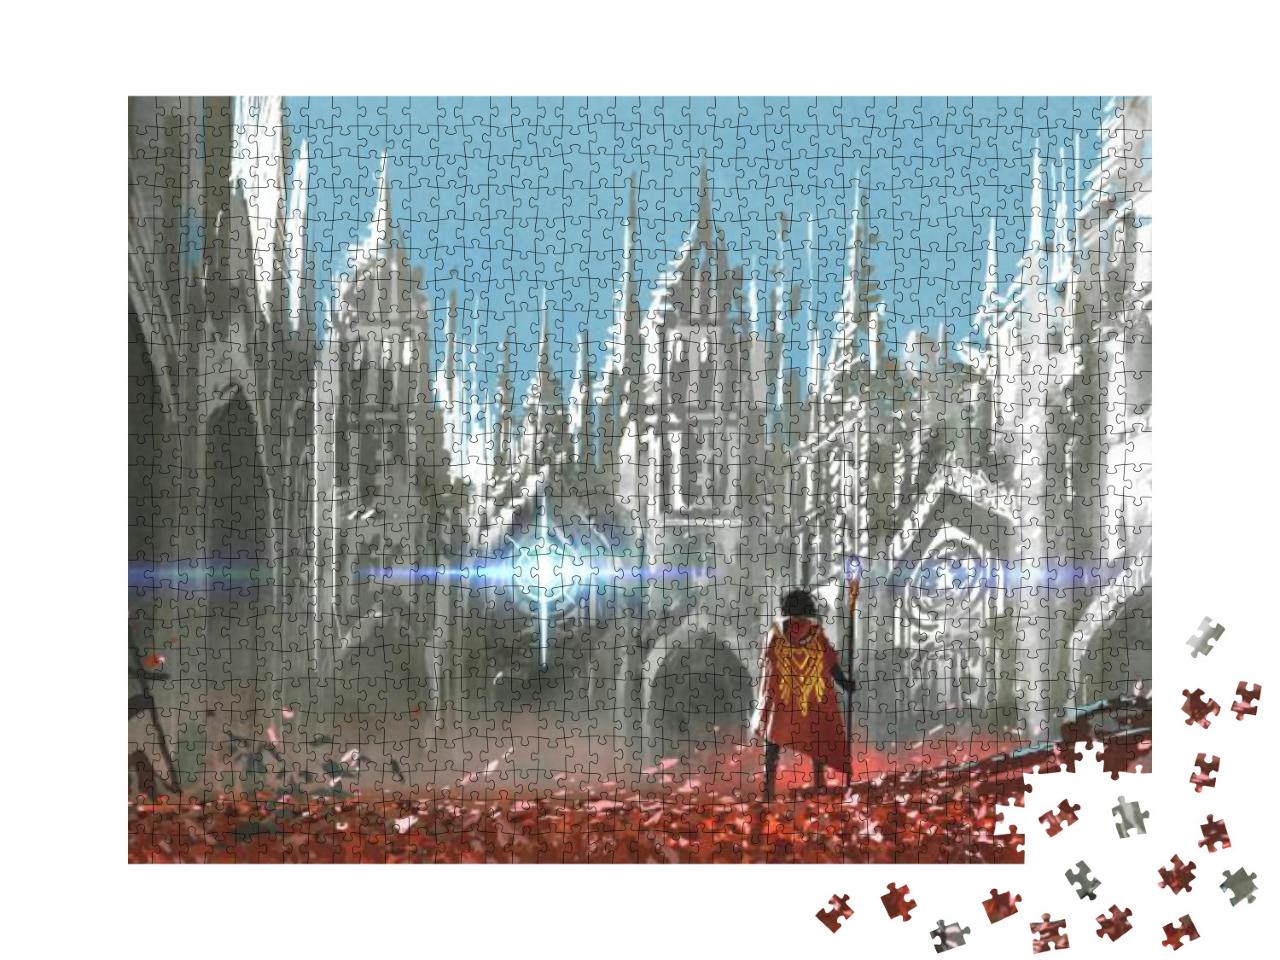 The Knight Looking At Mysterious Light in Gothic Building... Jigsaw Puzzle with 1000 pieces